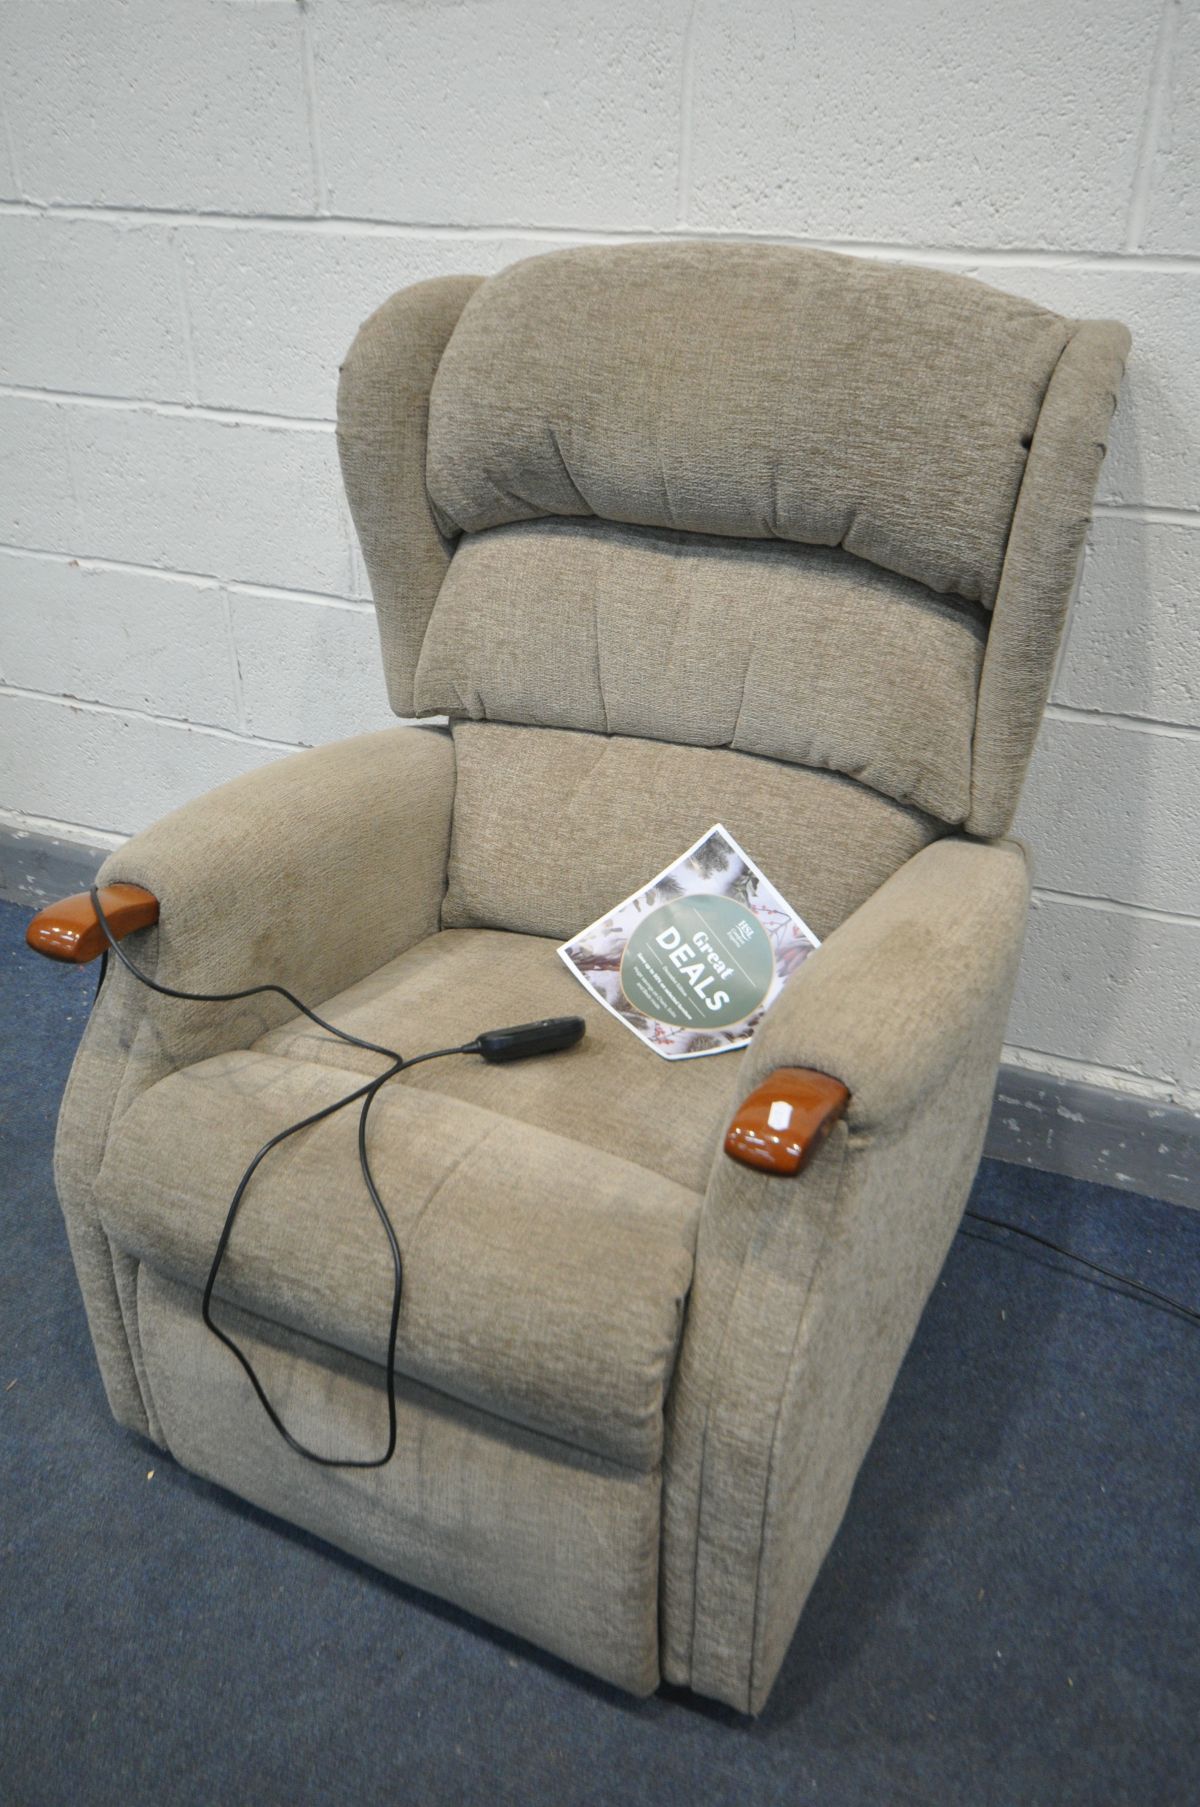 A HSL BEIGE UPHOLSTERED RISE AND RECLINE ARMCHAIR (Untested due to no batteries in battery pack)